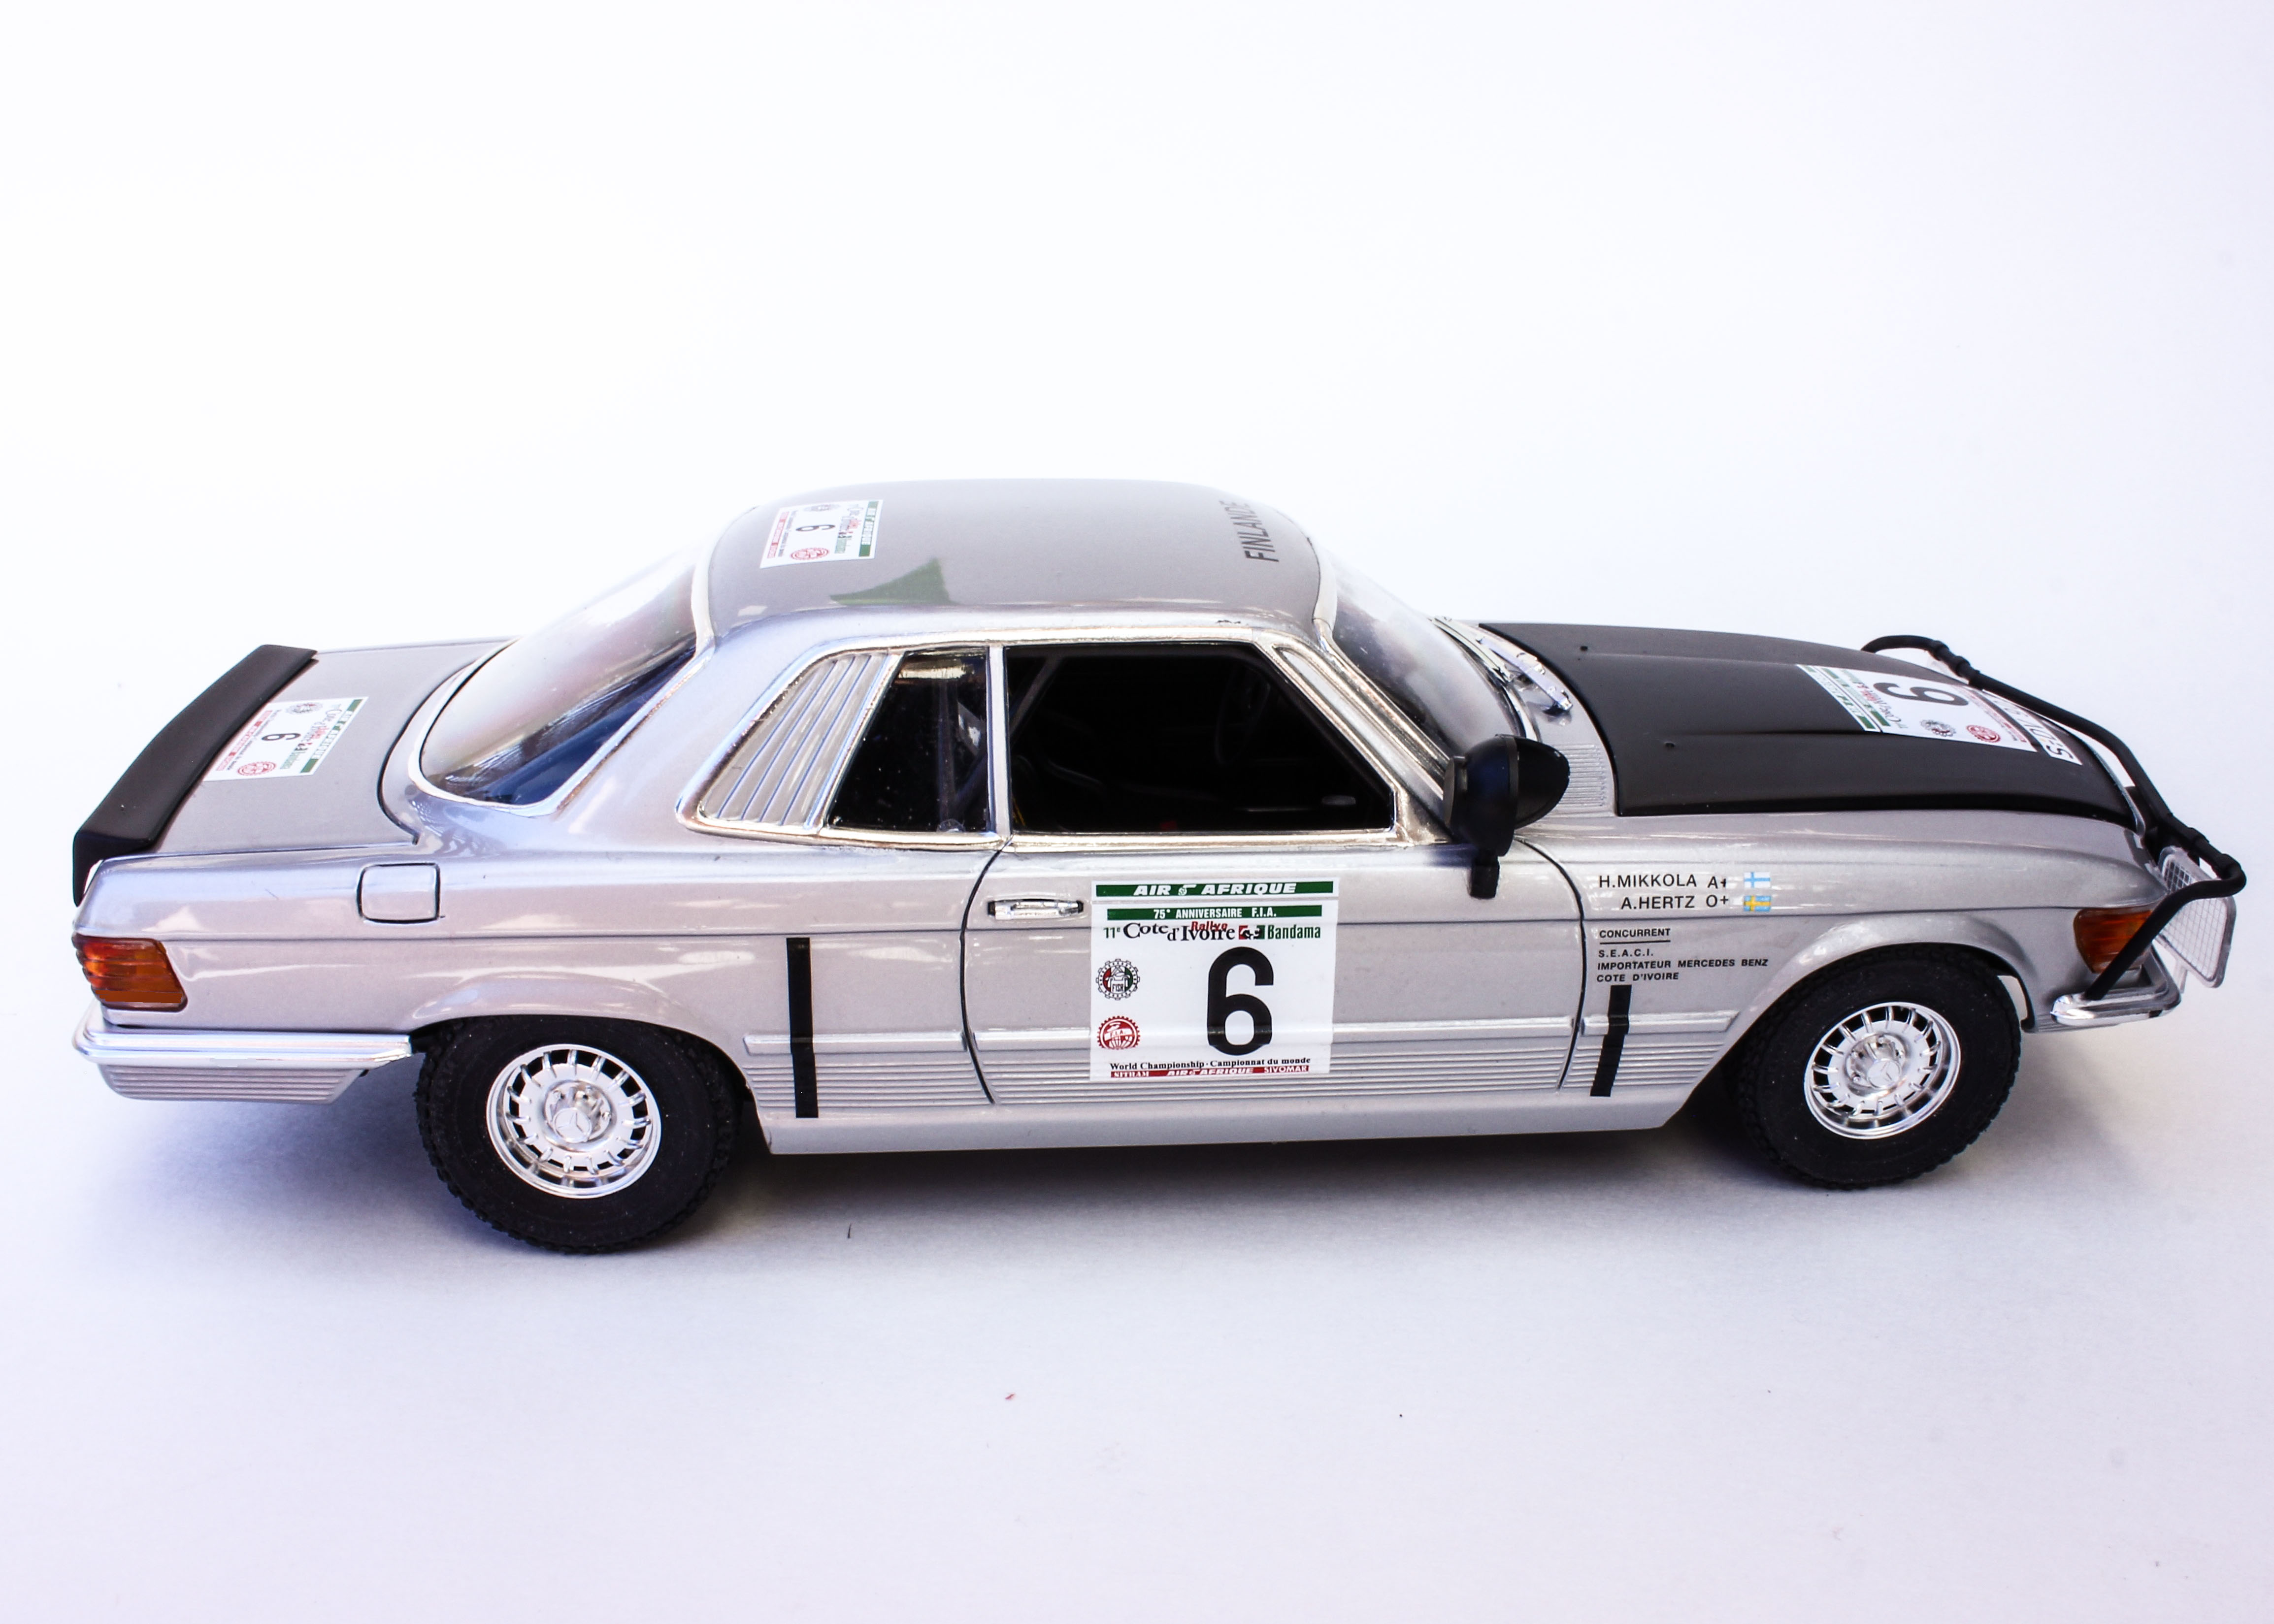 Build review of the Mercedes-Benz SLC Rally scale model car kit